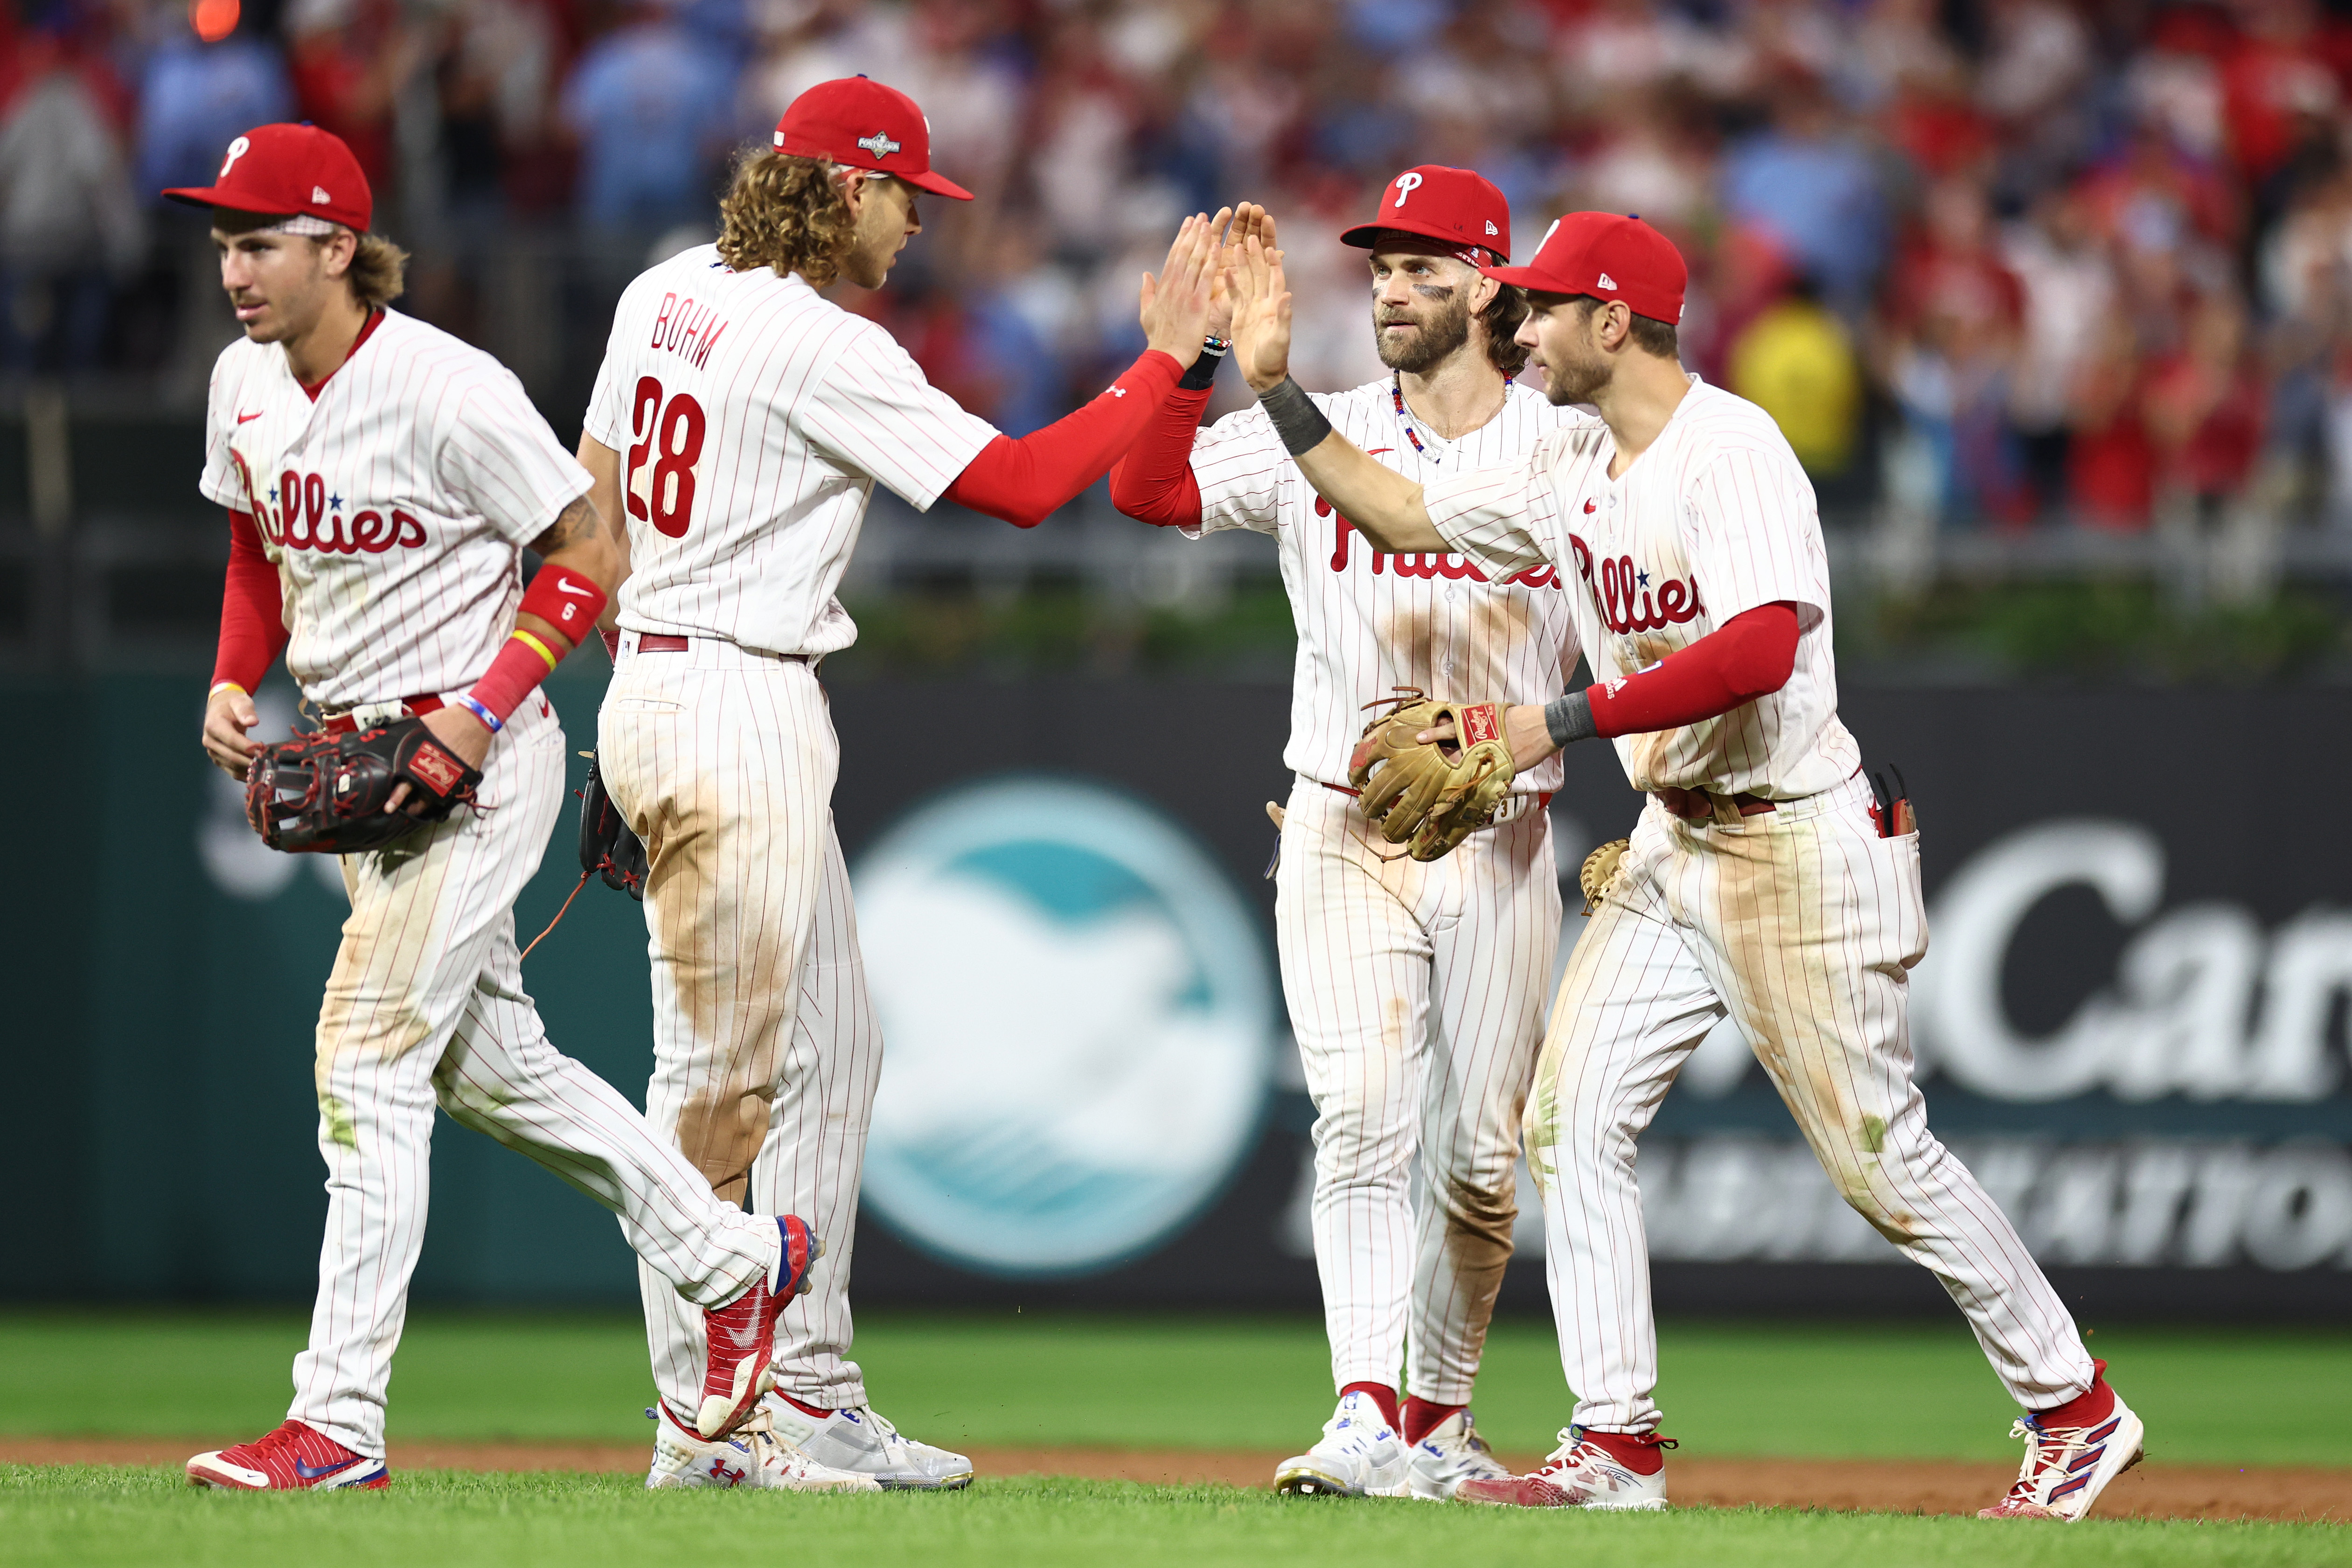 Alec Bohm, Rob Thomson tossed as Phillies fail to score in 3-0